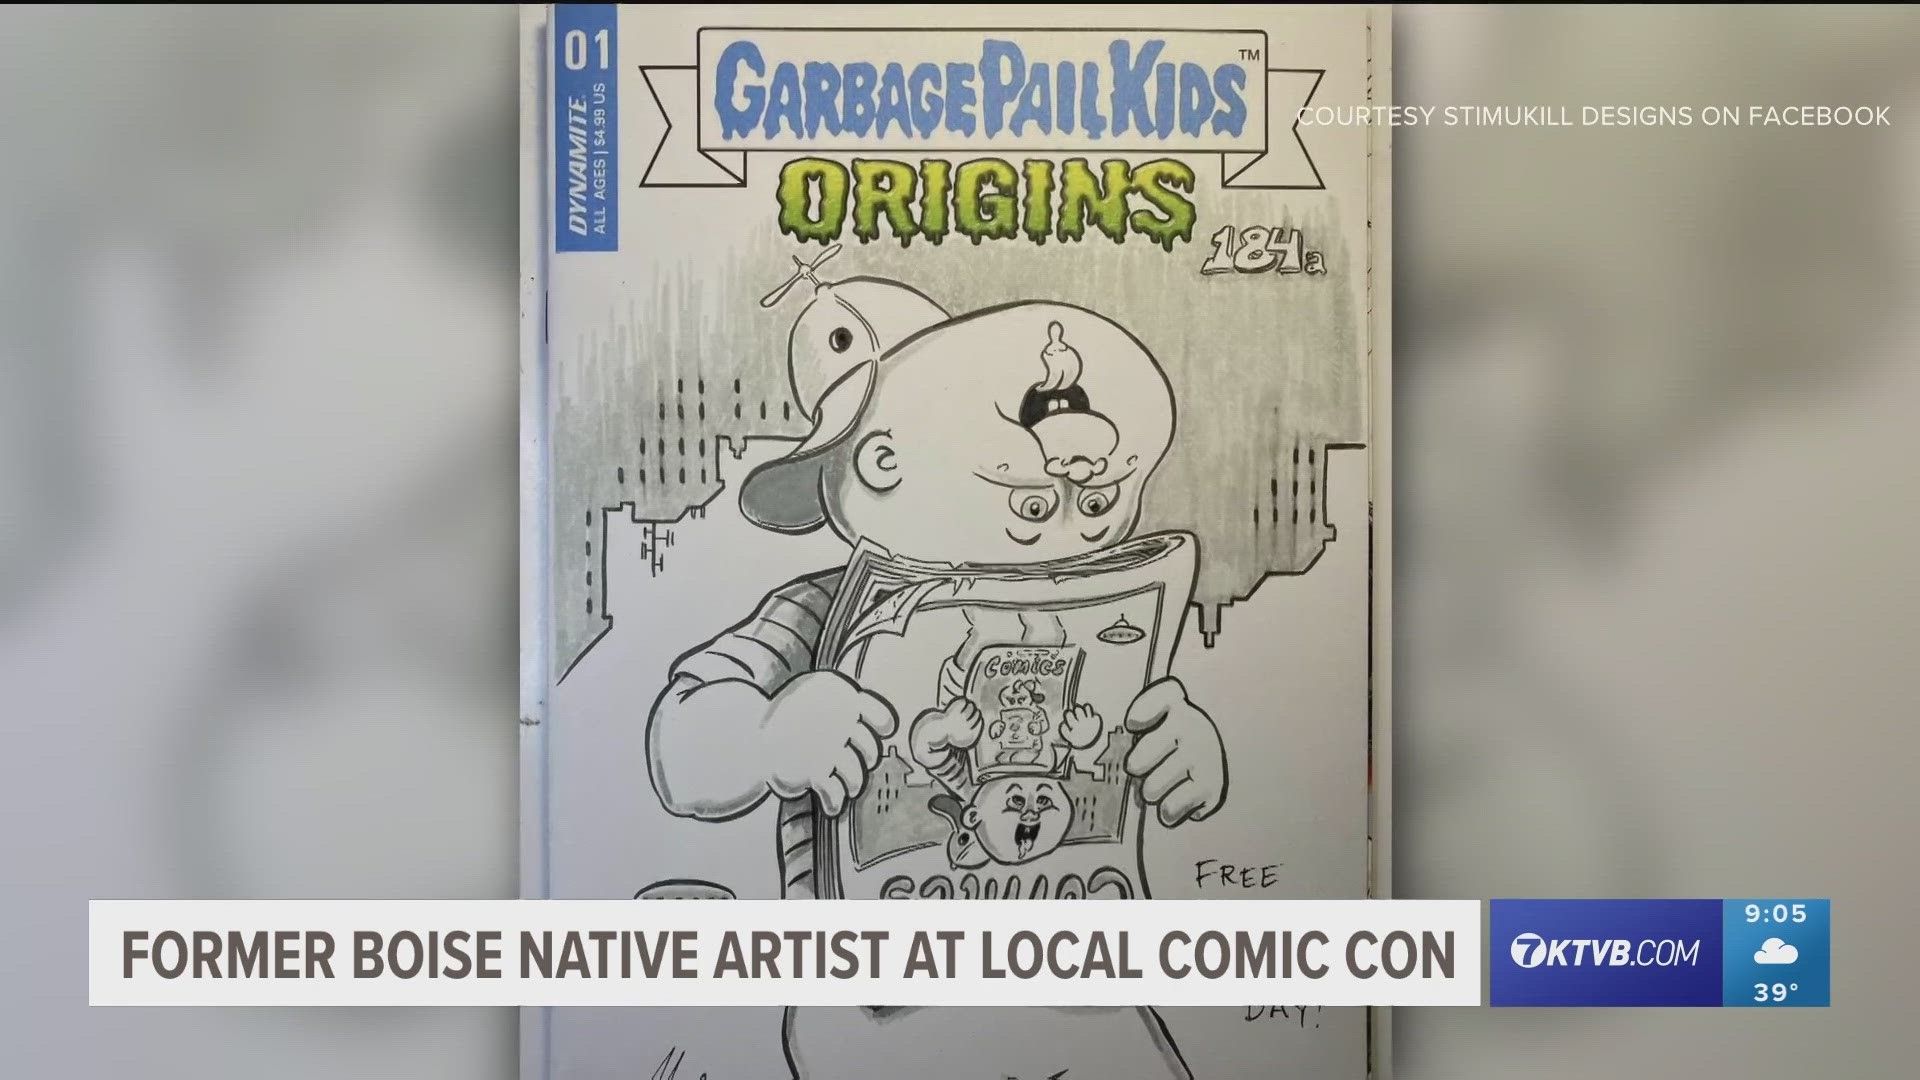 Jeff Cox, a freelance artist who used to live in Boise, creates special one-of-a-kind Garbage Pail Kids sketch cards that go out in random packs.